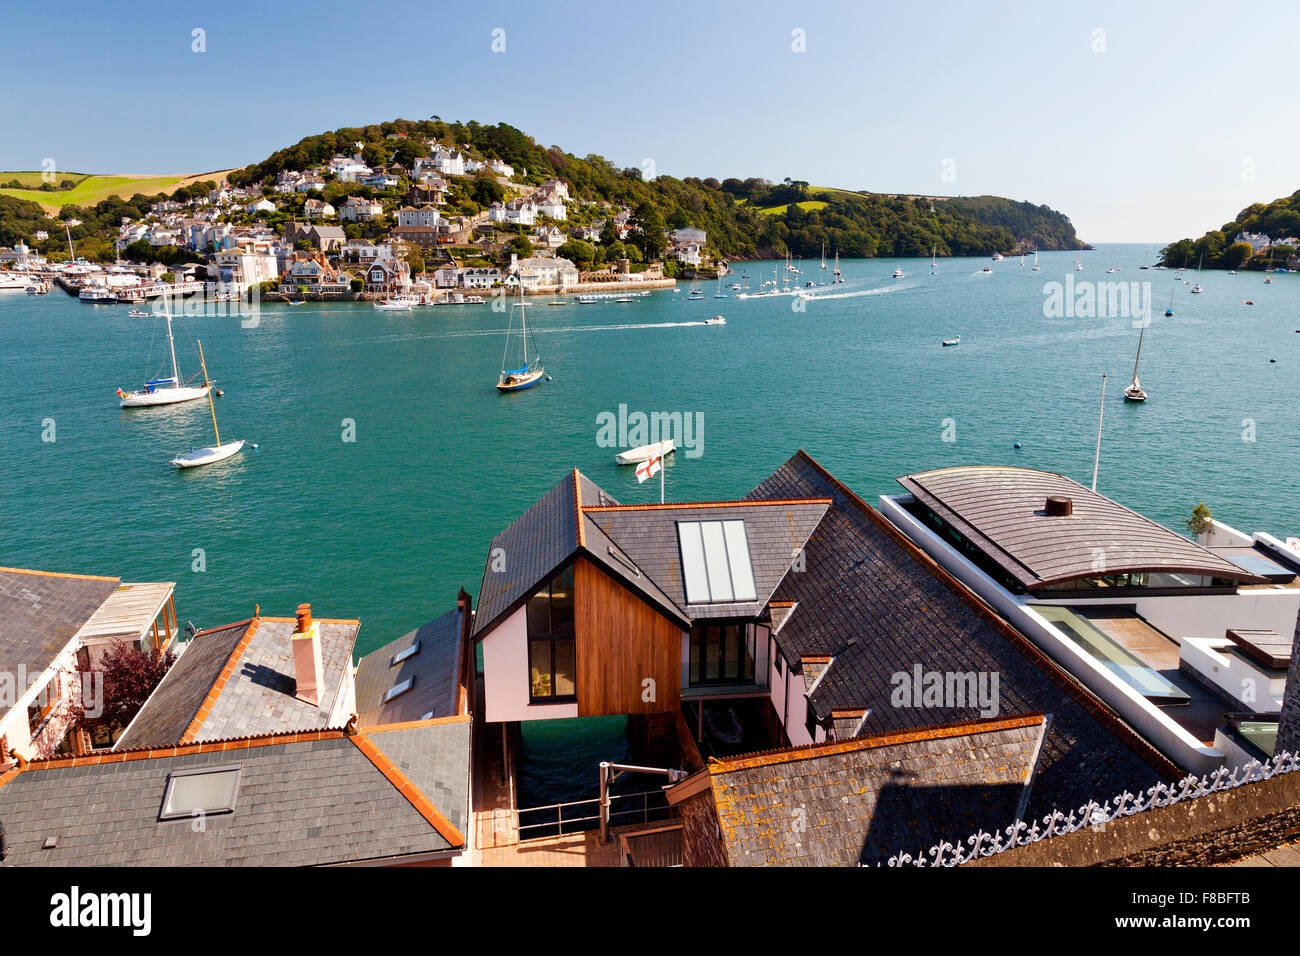 Looking out across the modern expensive waterfront houses on the River Dart towards Kingswear from Dartmouth, Devon, England, UK Stock Photo